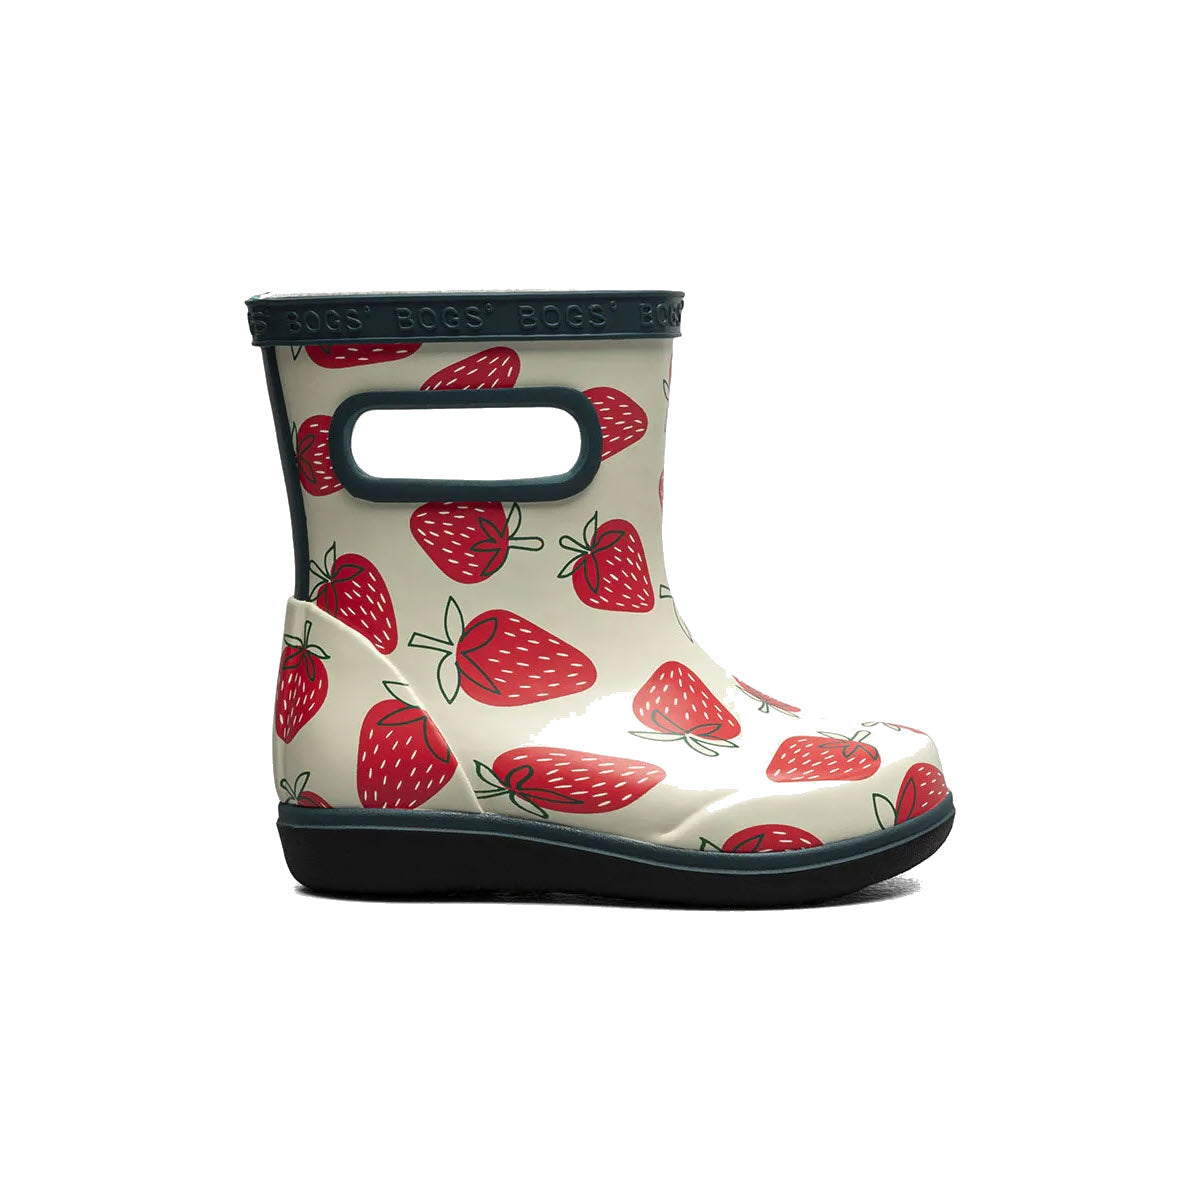 Children's BOGS SKIPPER II STRAWBERRIES boots with strawberry print on a white background, featuring easy-grip handles.